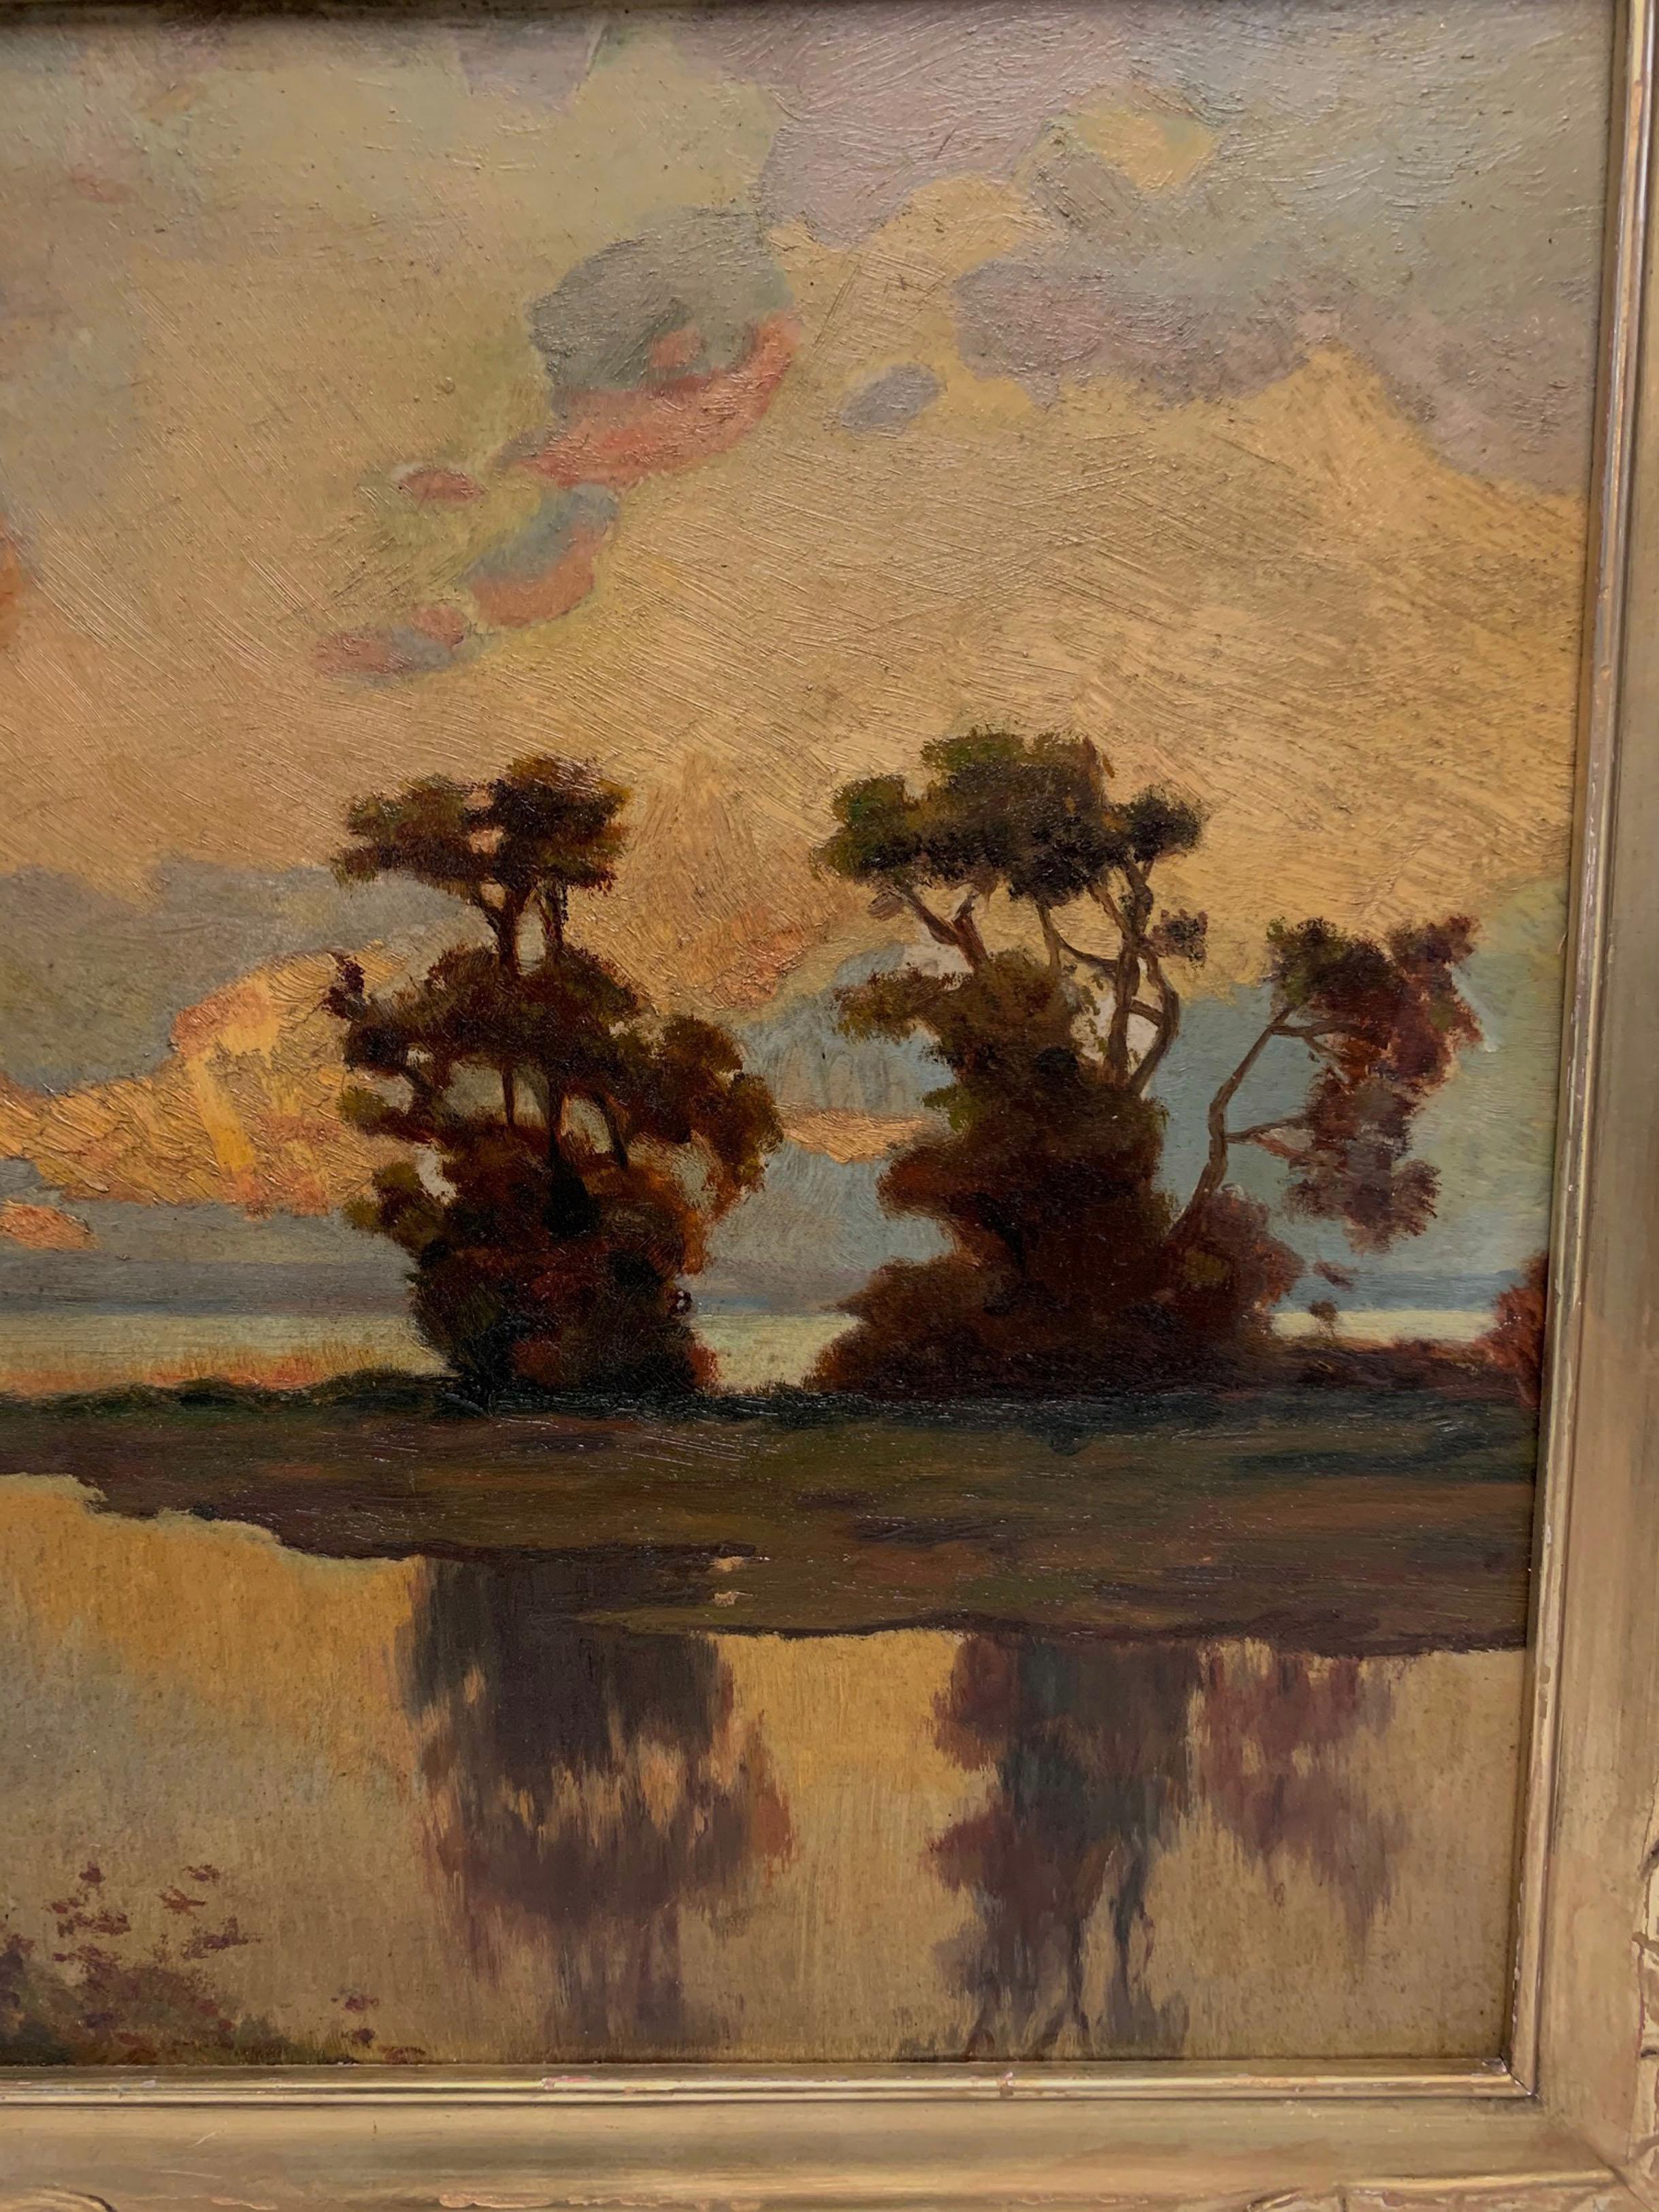 Late 19th century American impressionist oil on academy board, salt marshes near Essex, Mass. at sunset. Pencil signed on reverse, R. Lewis, in hand carved gilded frame.